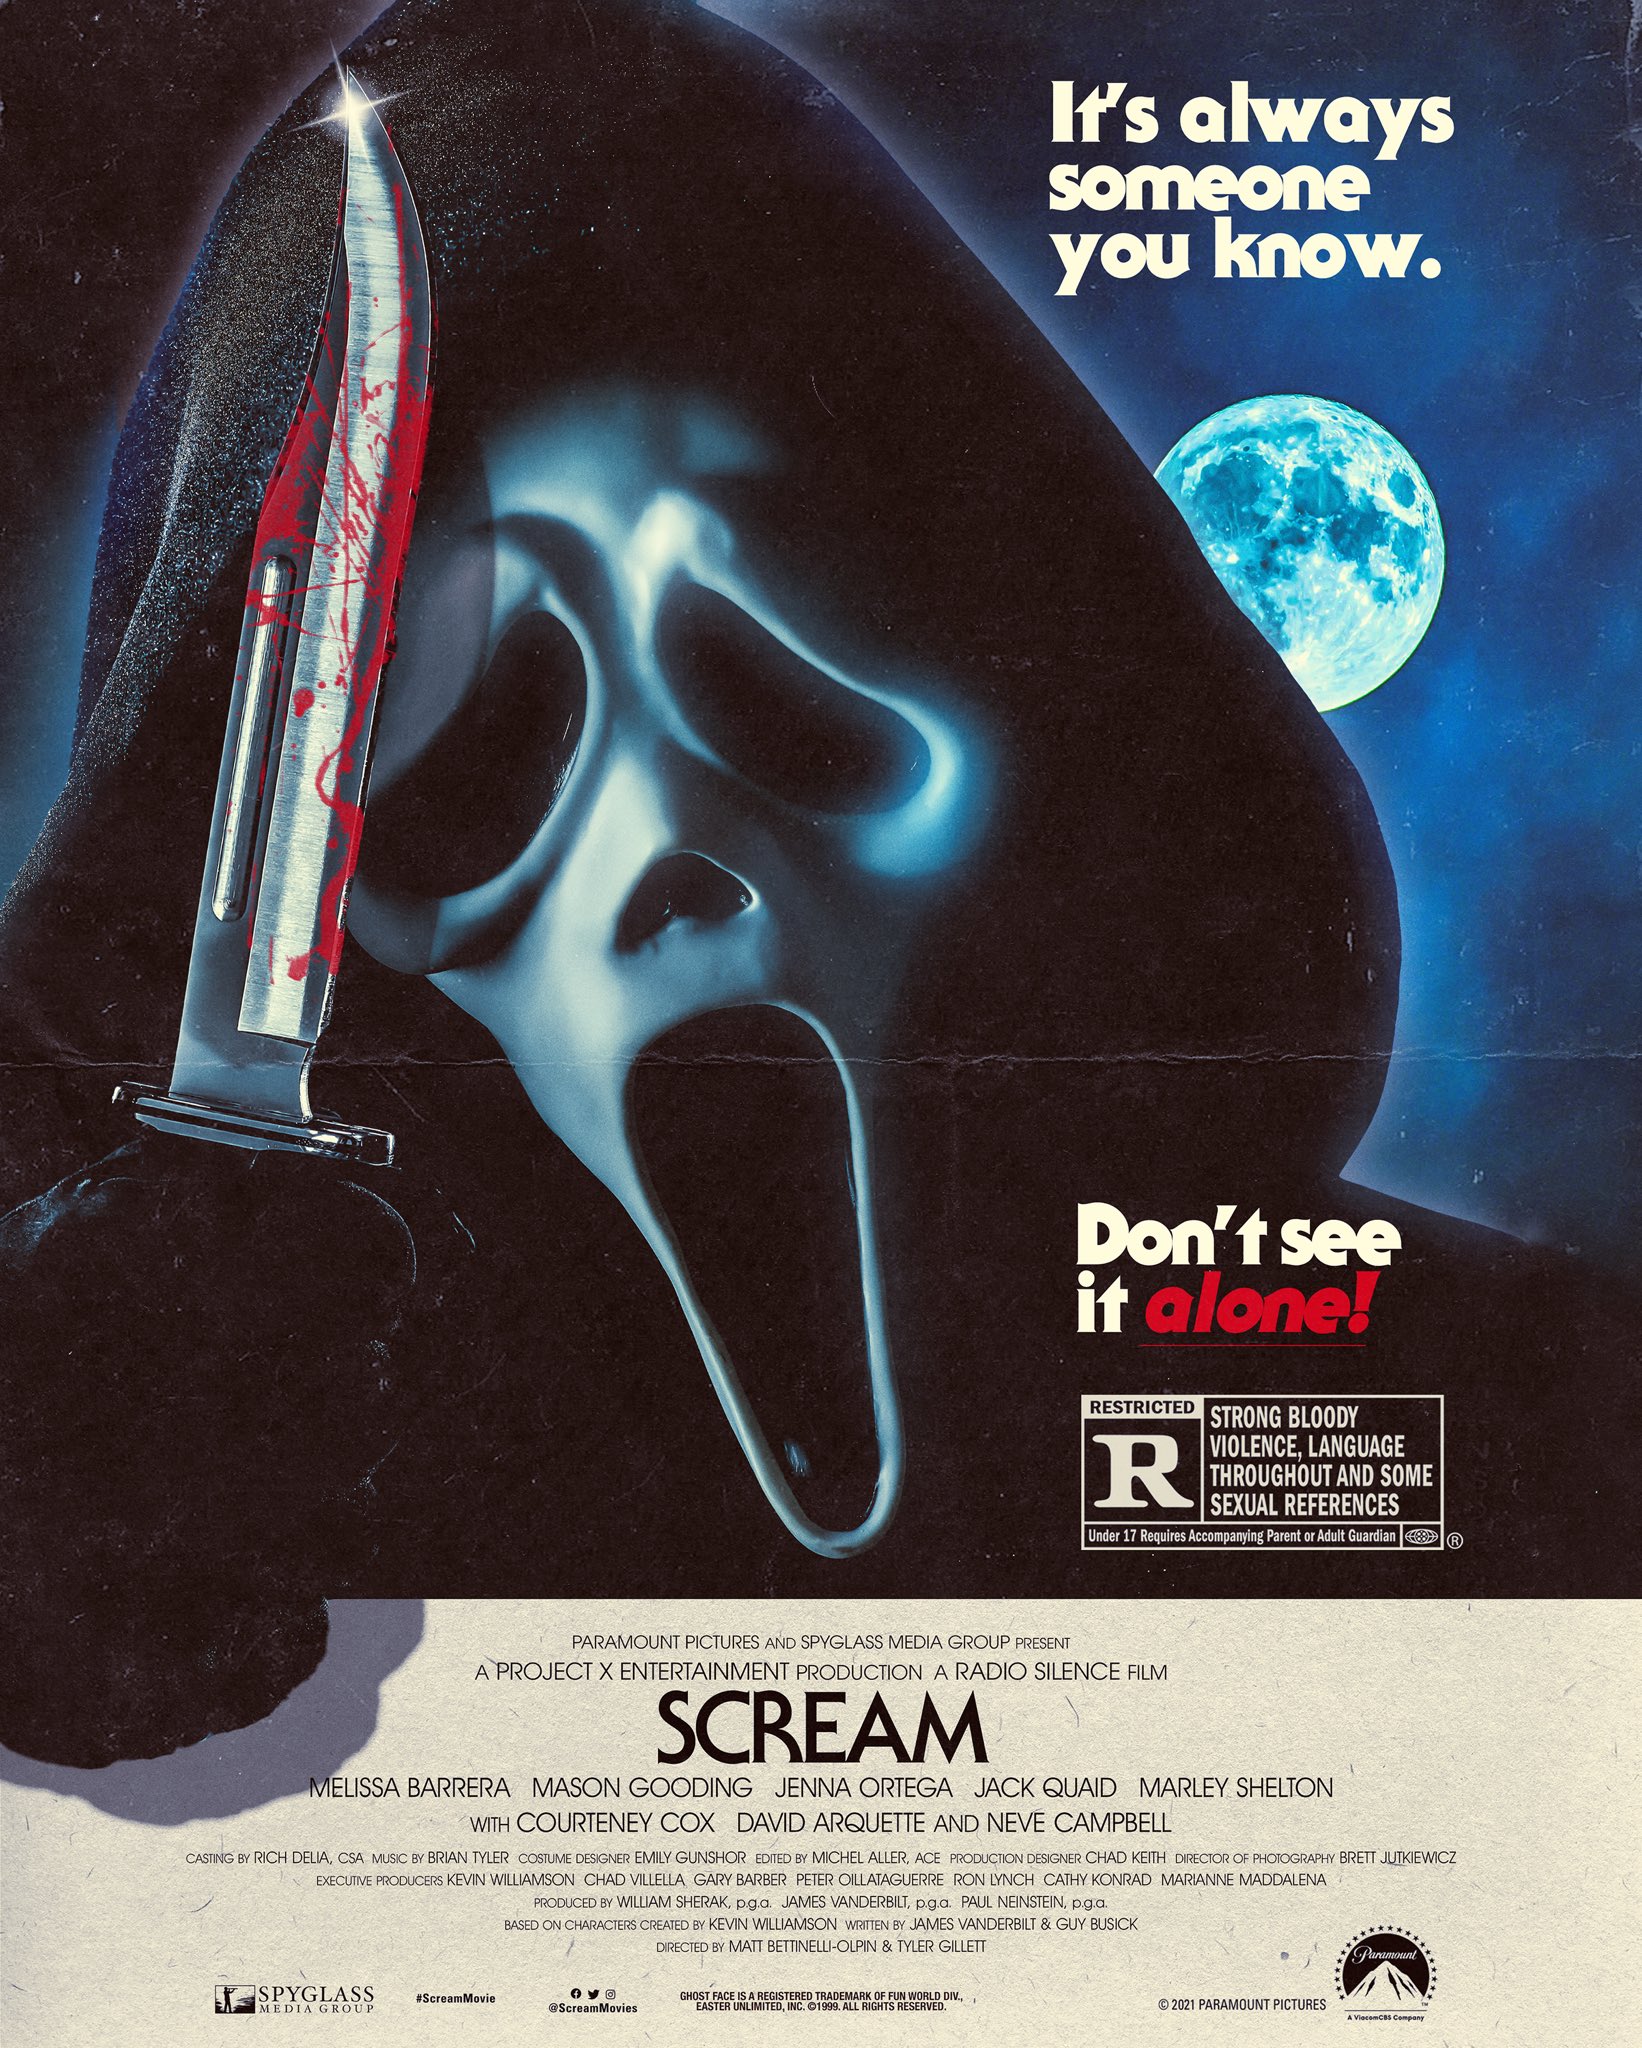 Scarily beautiful Scream movie posters drive the wild